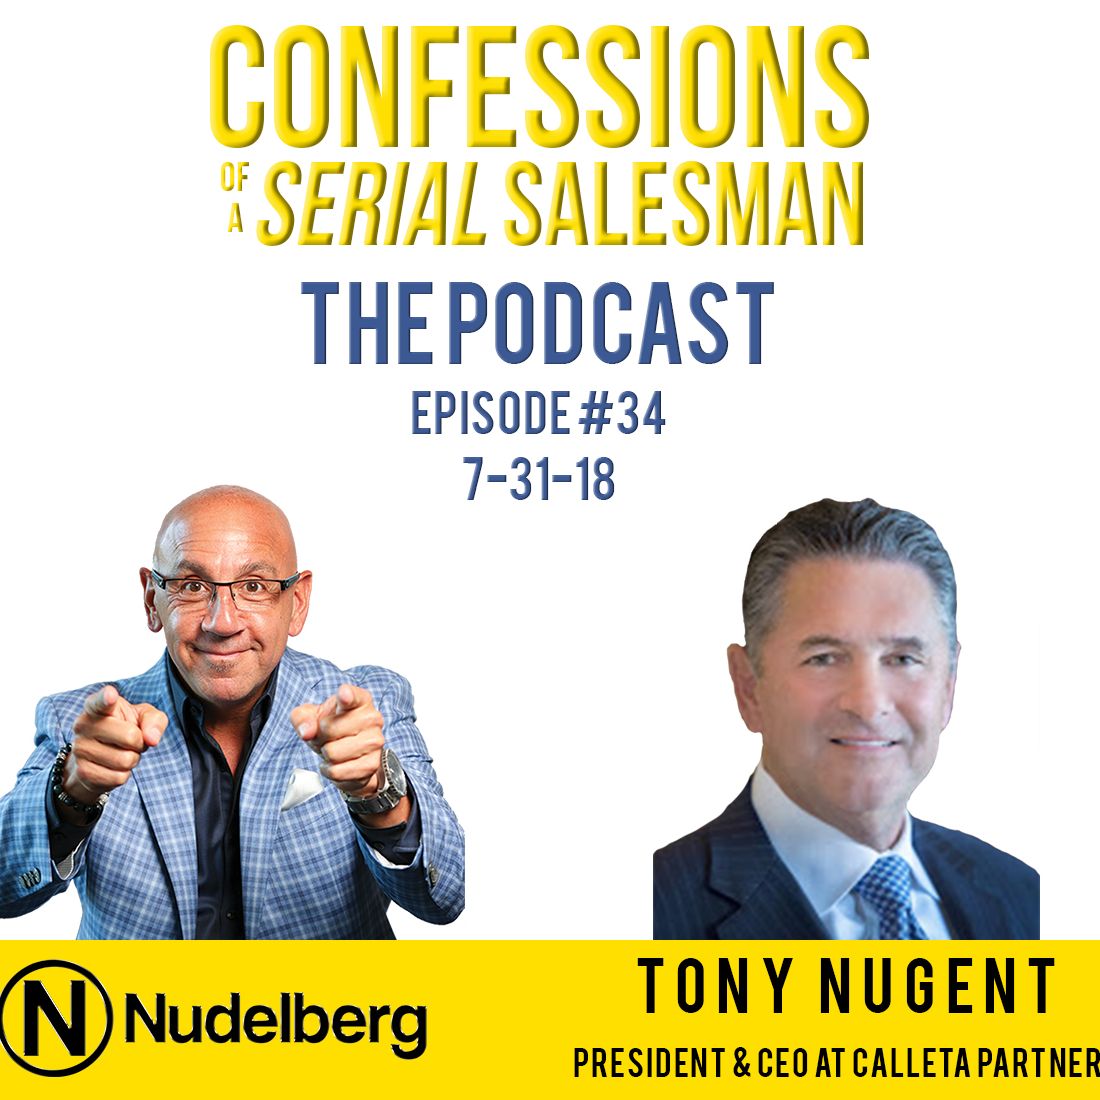 Confessions of a Serial Salesman The Podcast with Tony Nugent, President & CEO at Calleta Partners